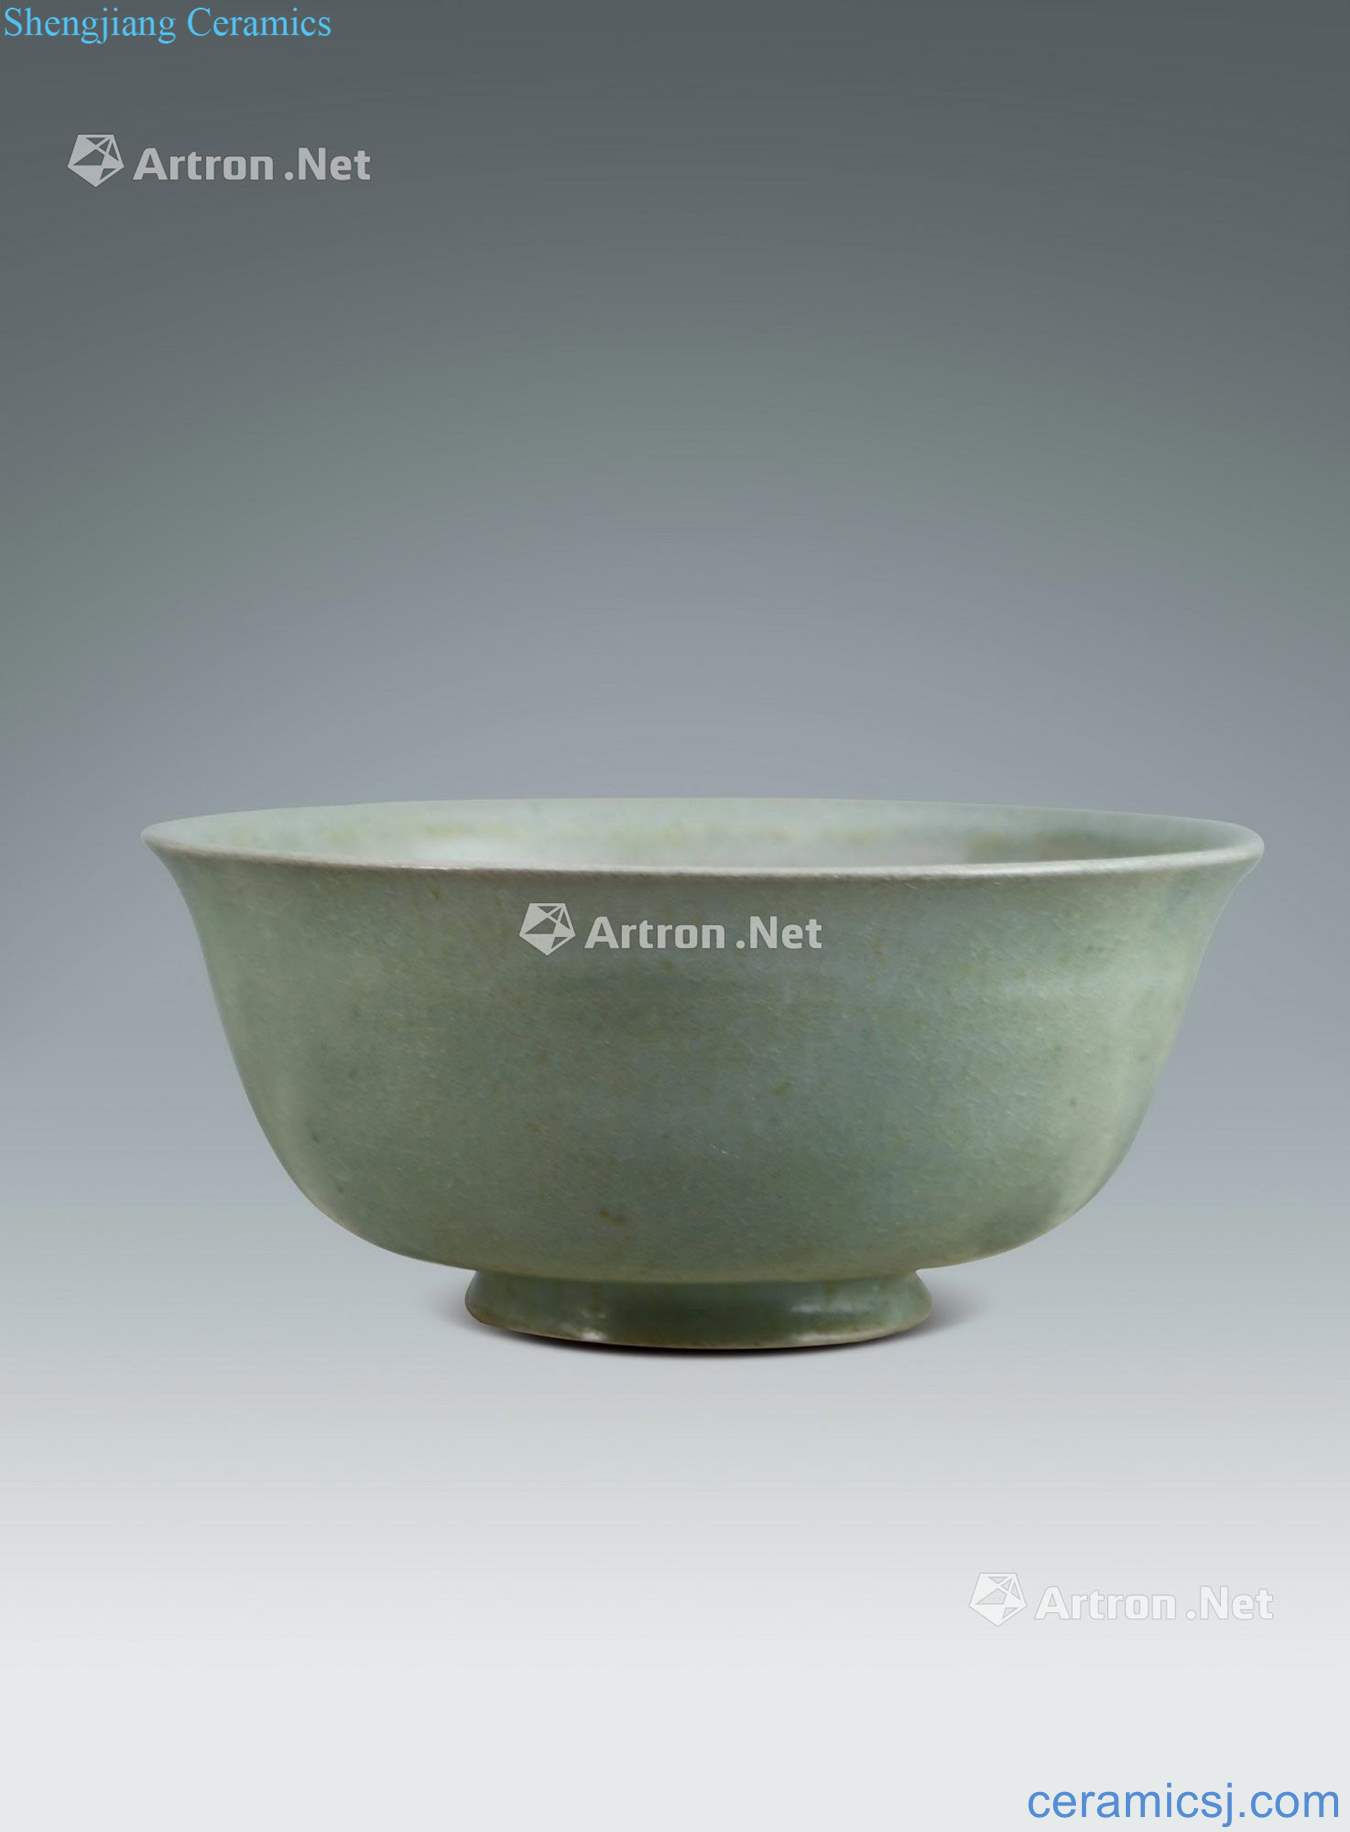 The song dynasty Your kiln bowl